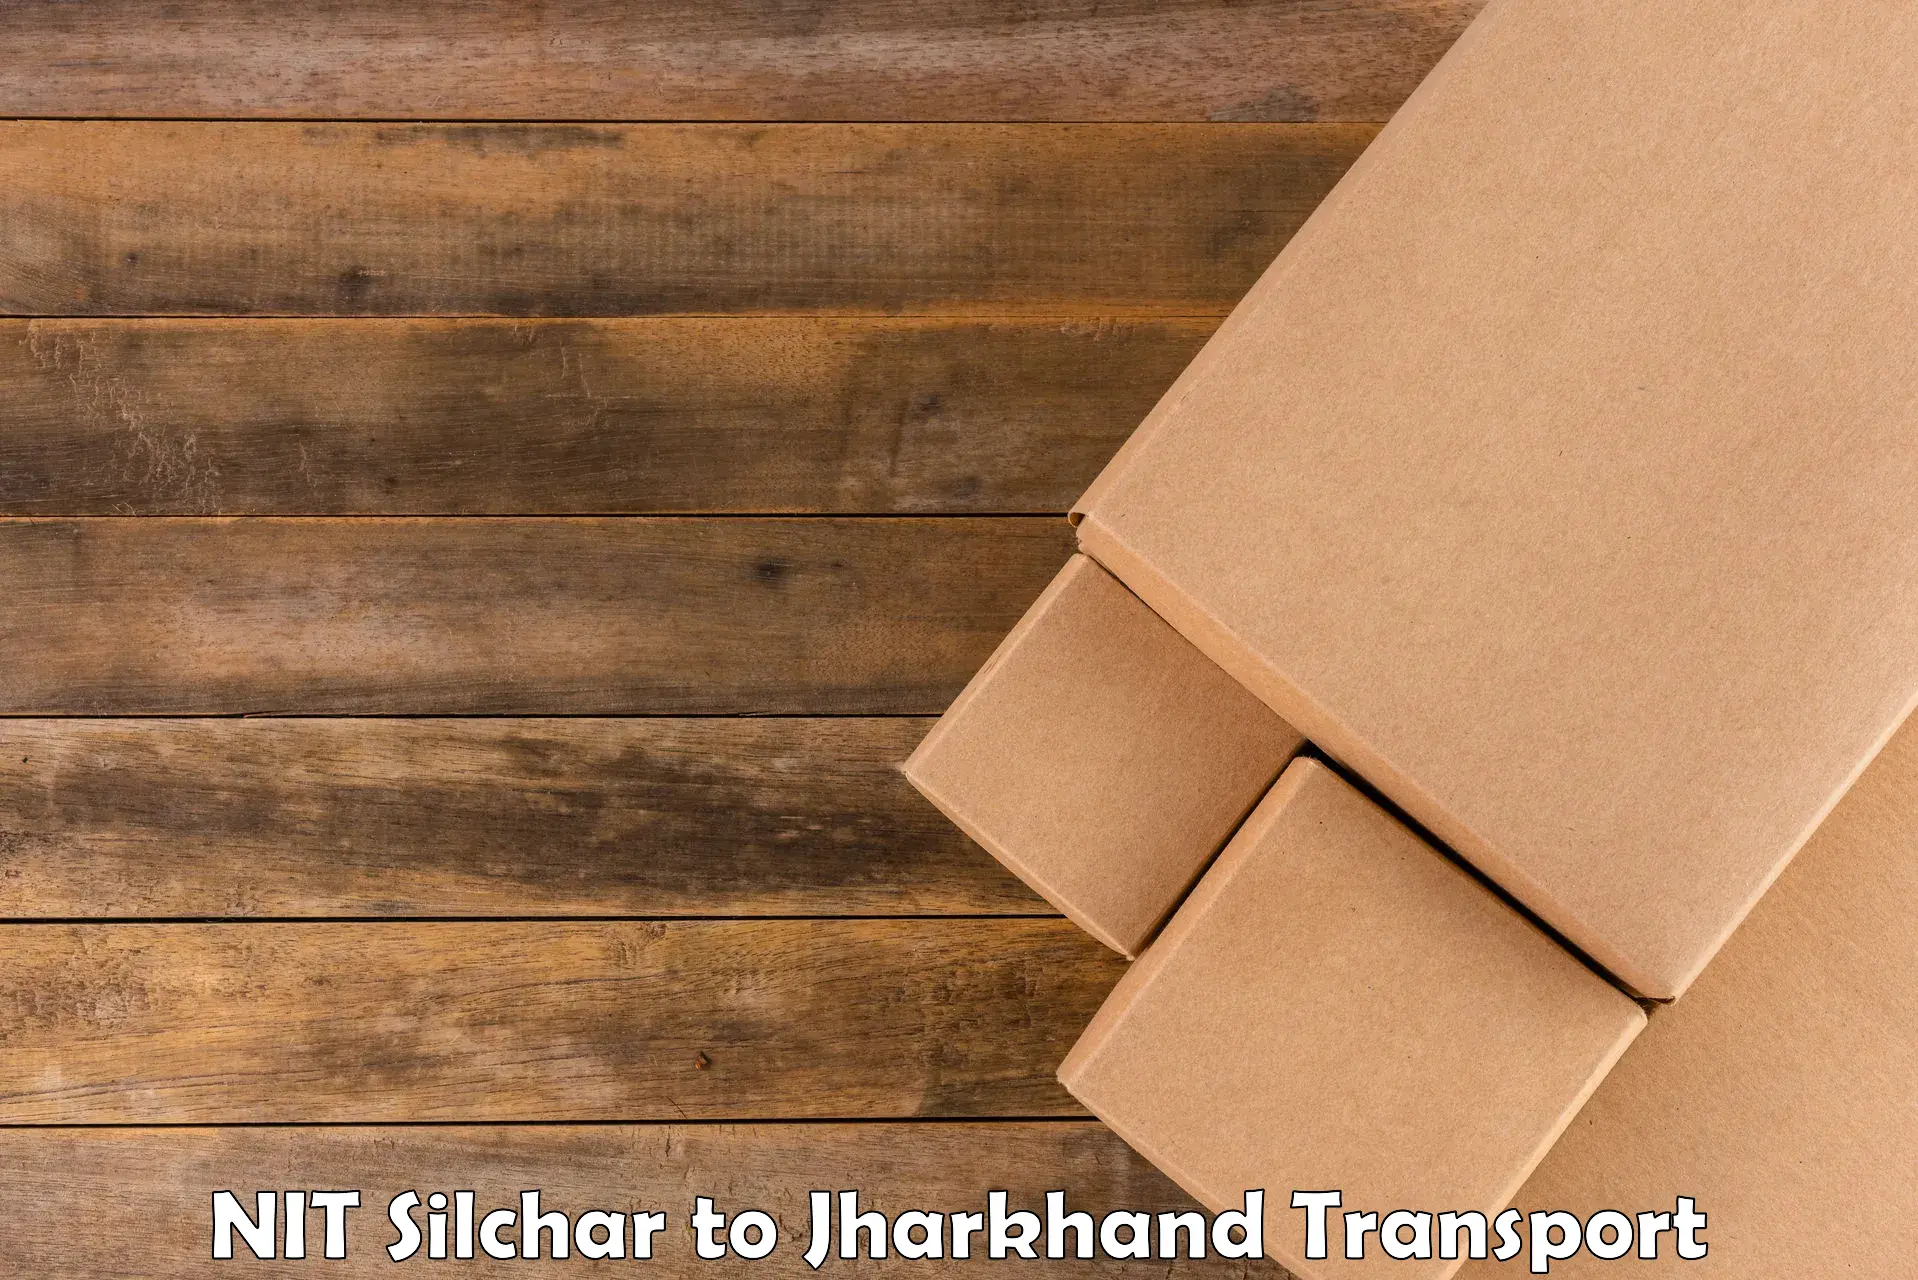 Air freight transport services NIT Silchar to Padma Hazaribagh